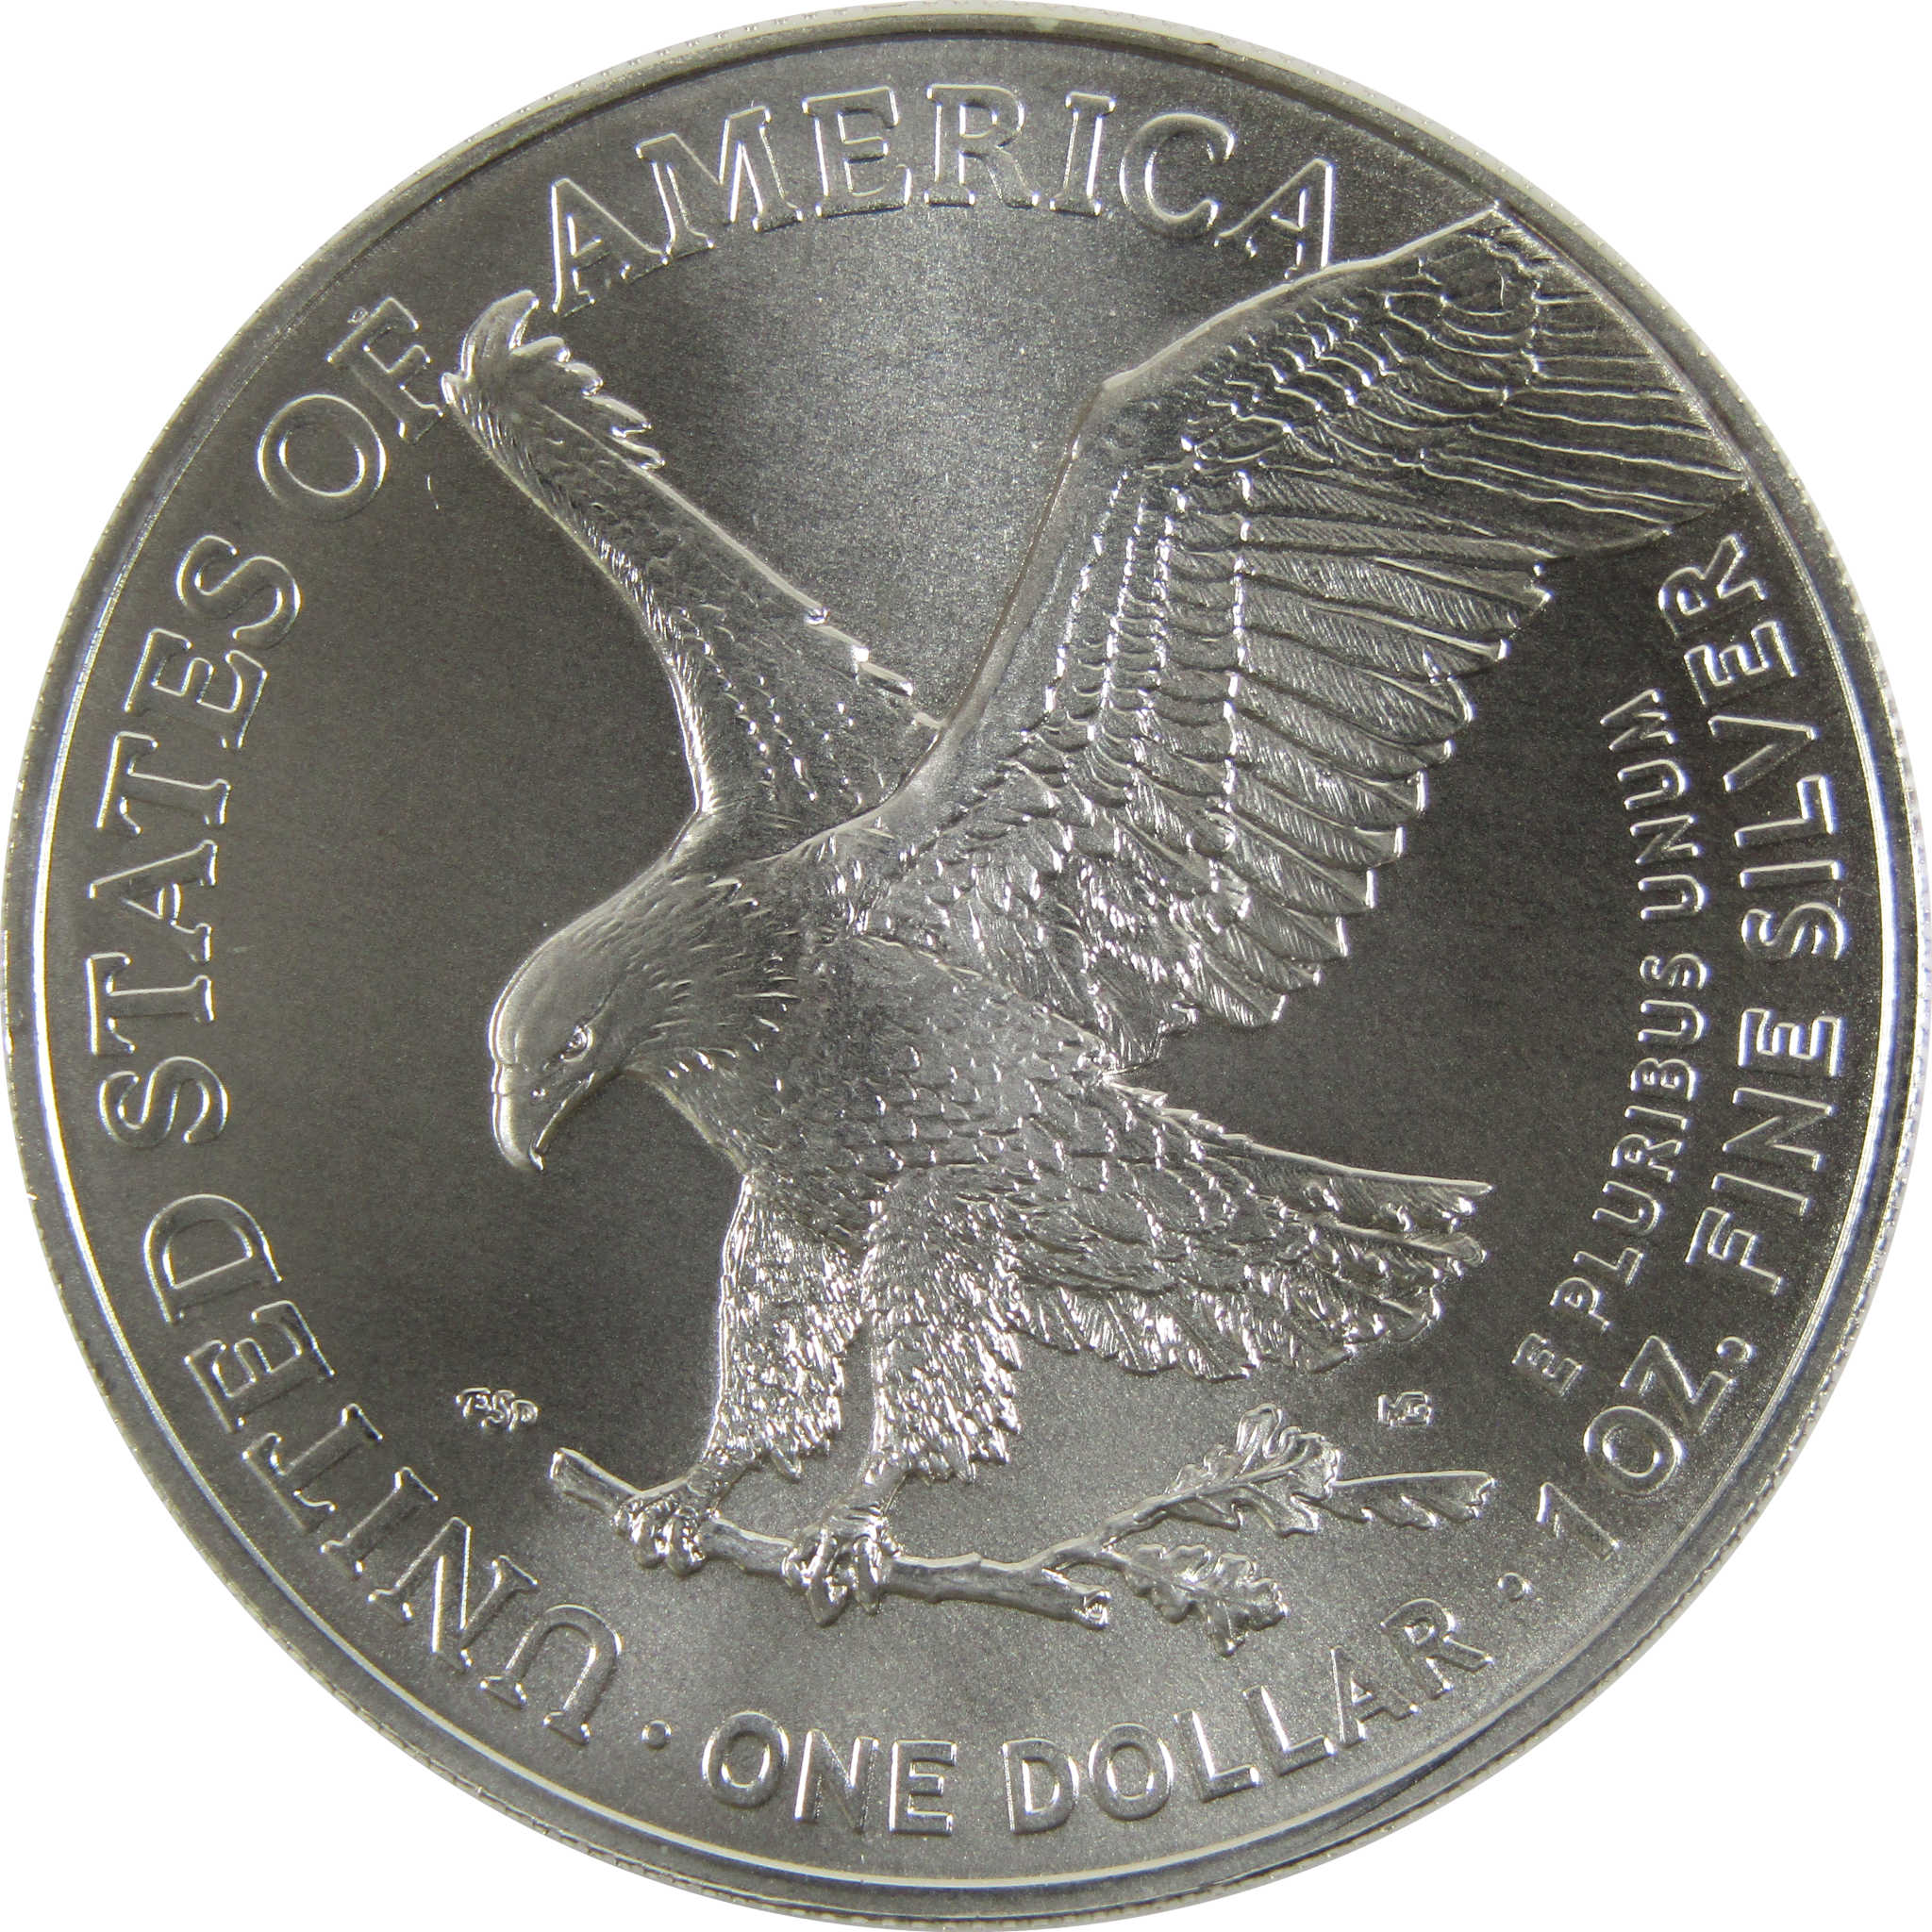 2022 American Eagle Silver Coin 1 oz 999 Fine Silver $1 Brilliant  Uncirculated Type 2 New at 's Collectible Coins Store